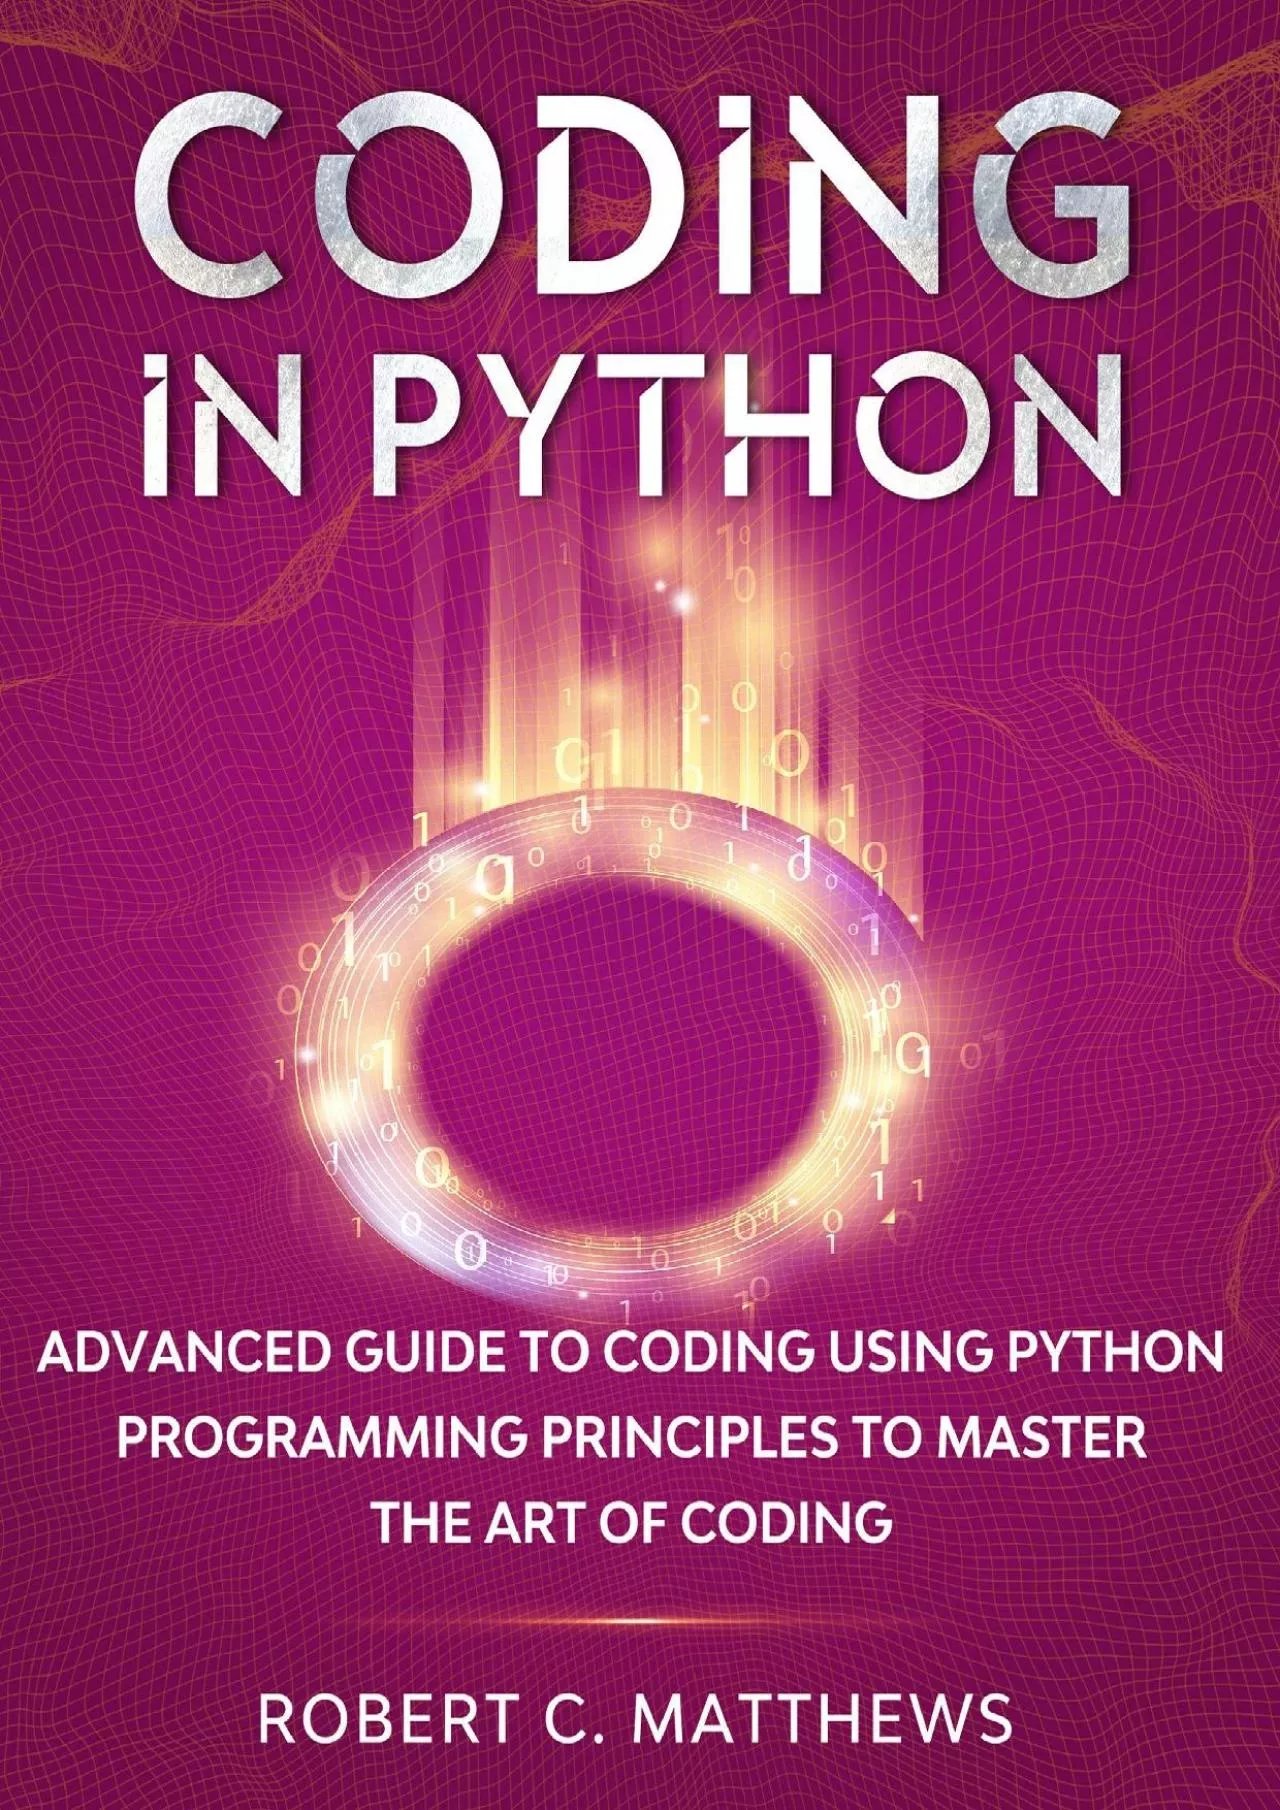 [PDF]-Coding in Python Advanced Guide to Coding Using Python Programming Principles to